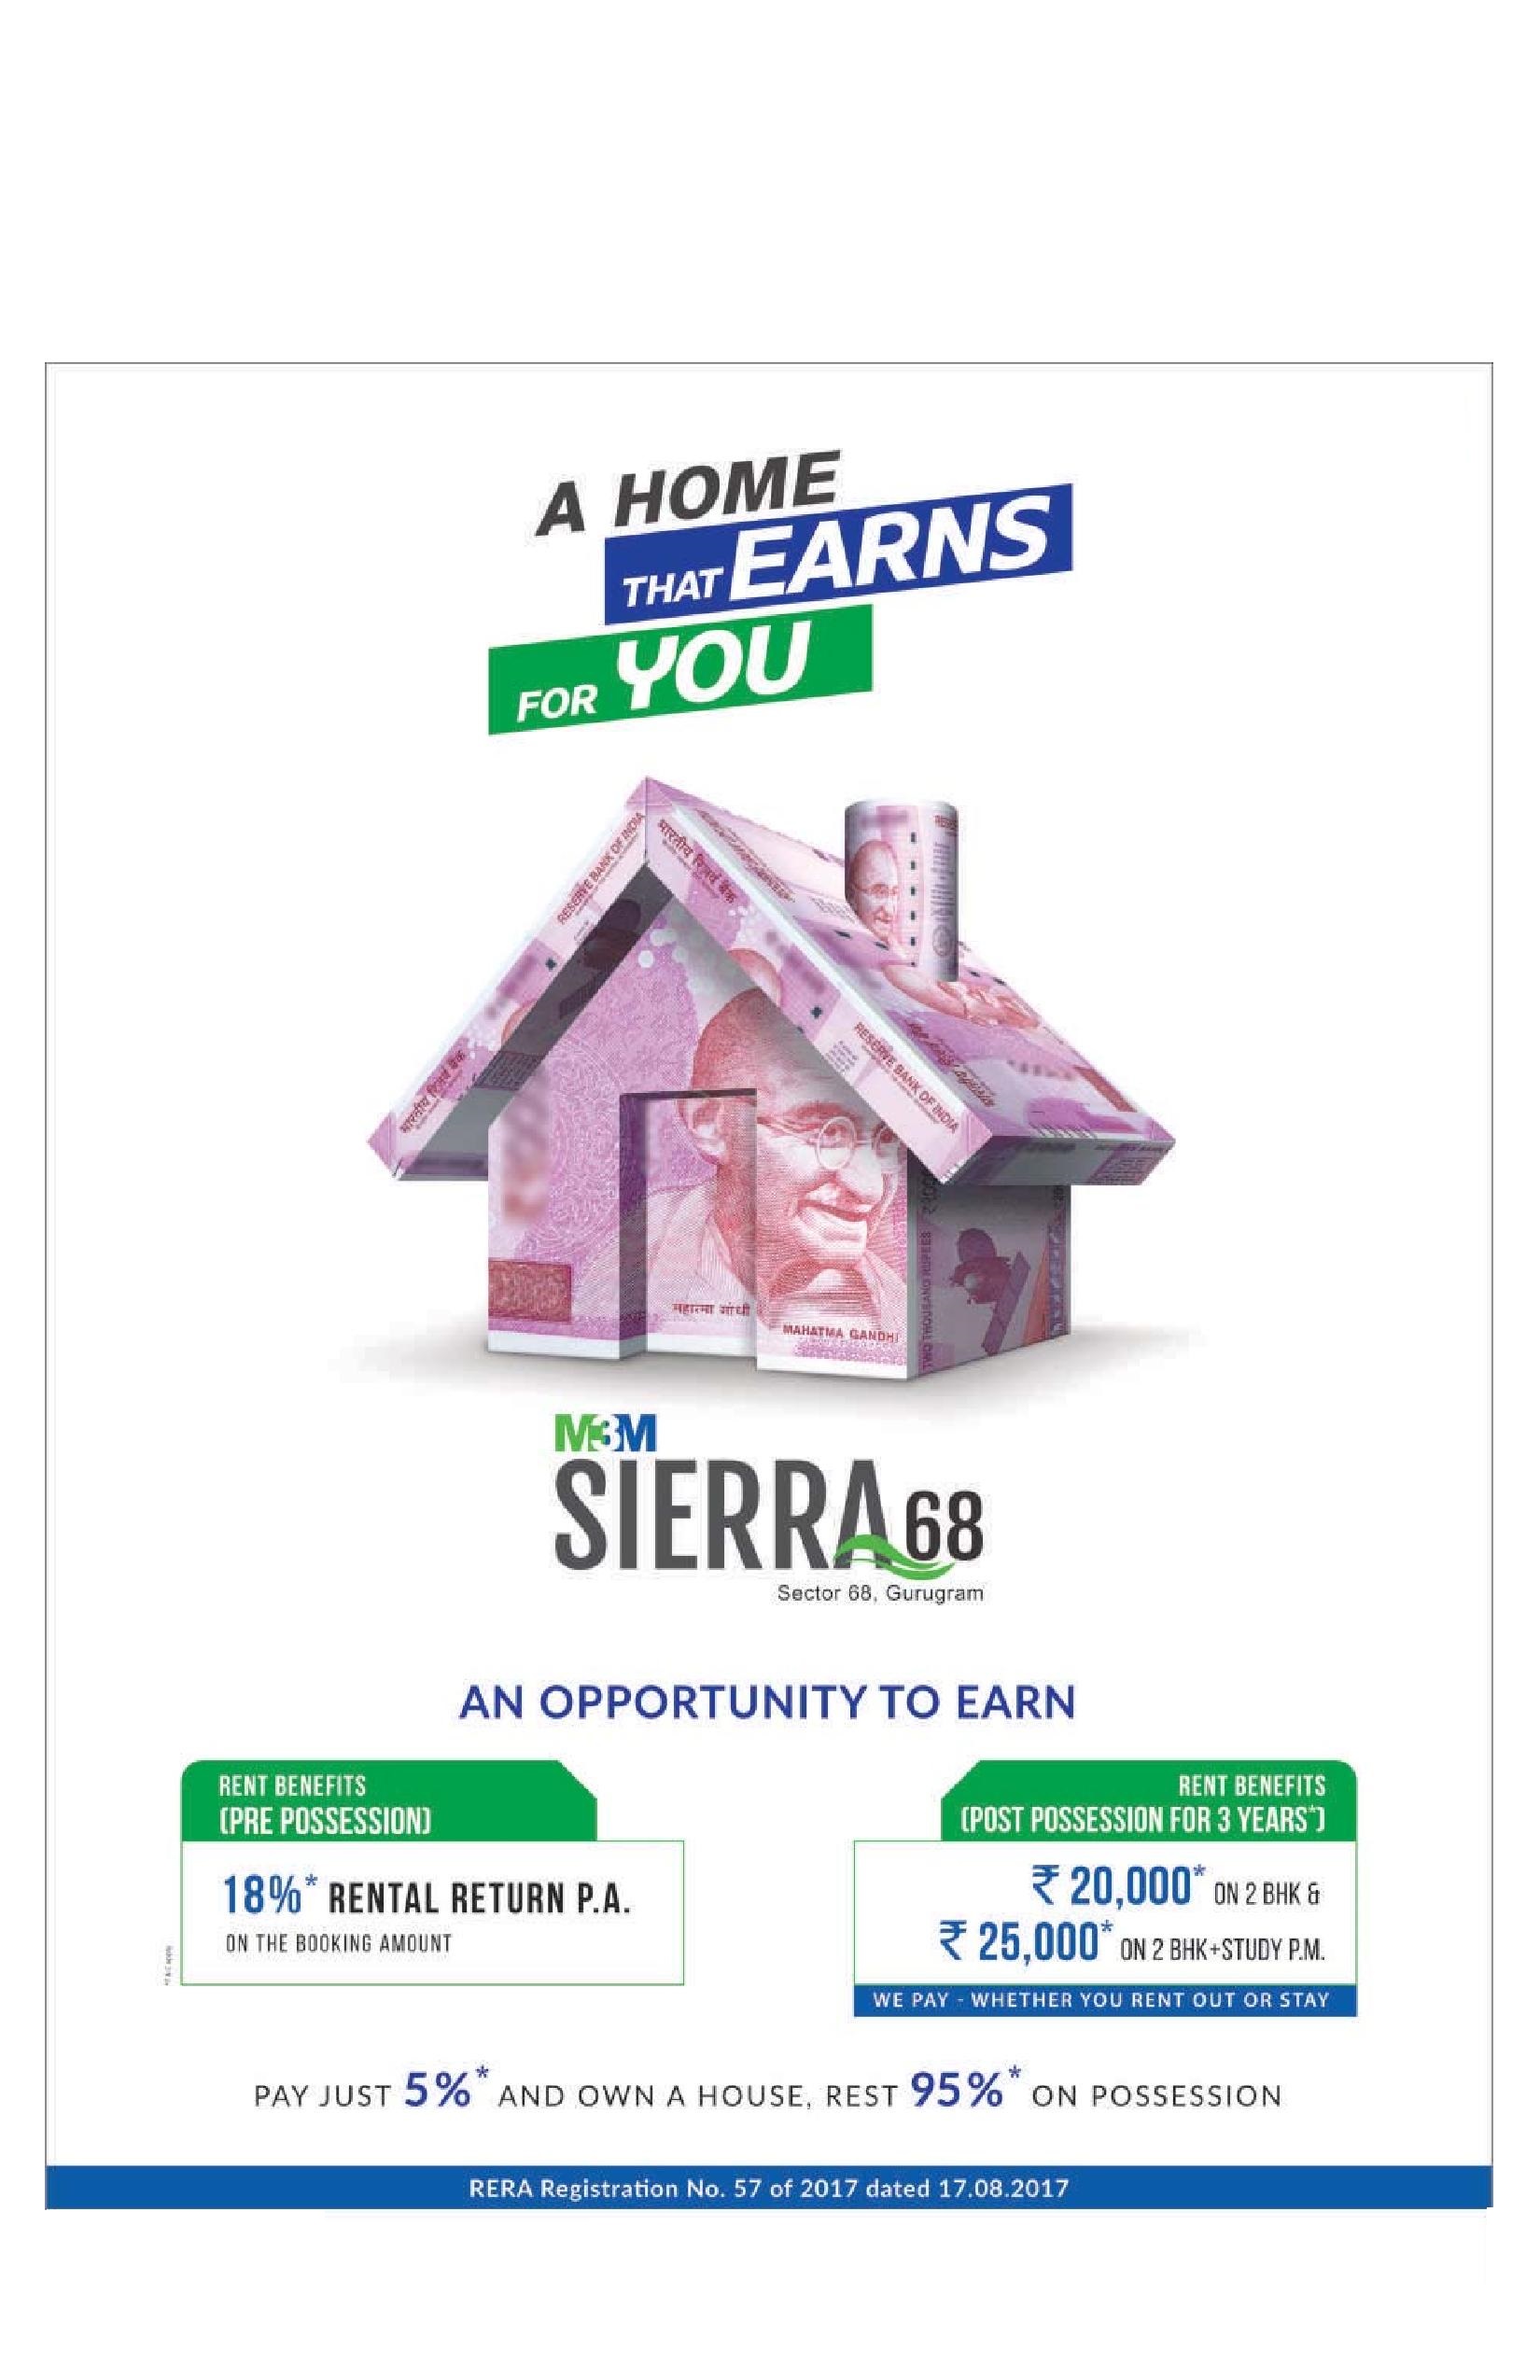 Pay just 5%  & rest 95% on possession at M3M Sierra in Gurgaon Update